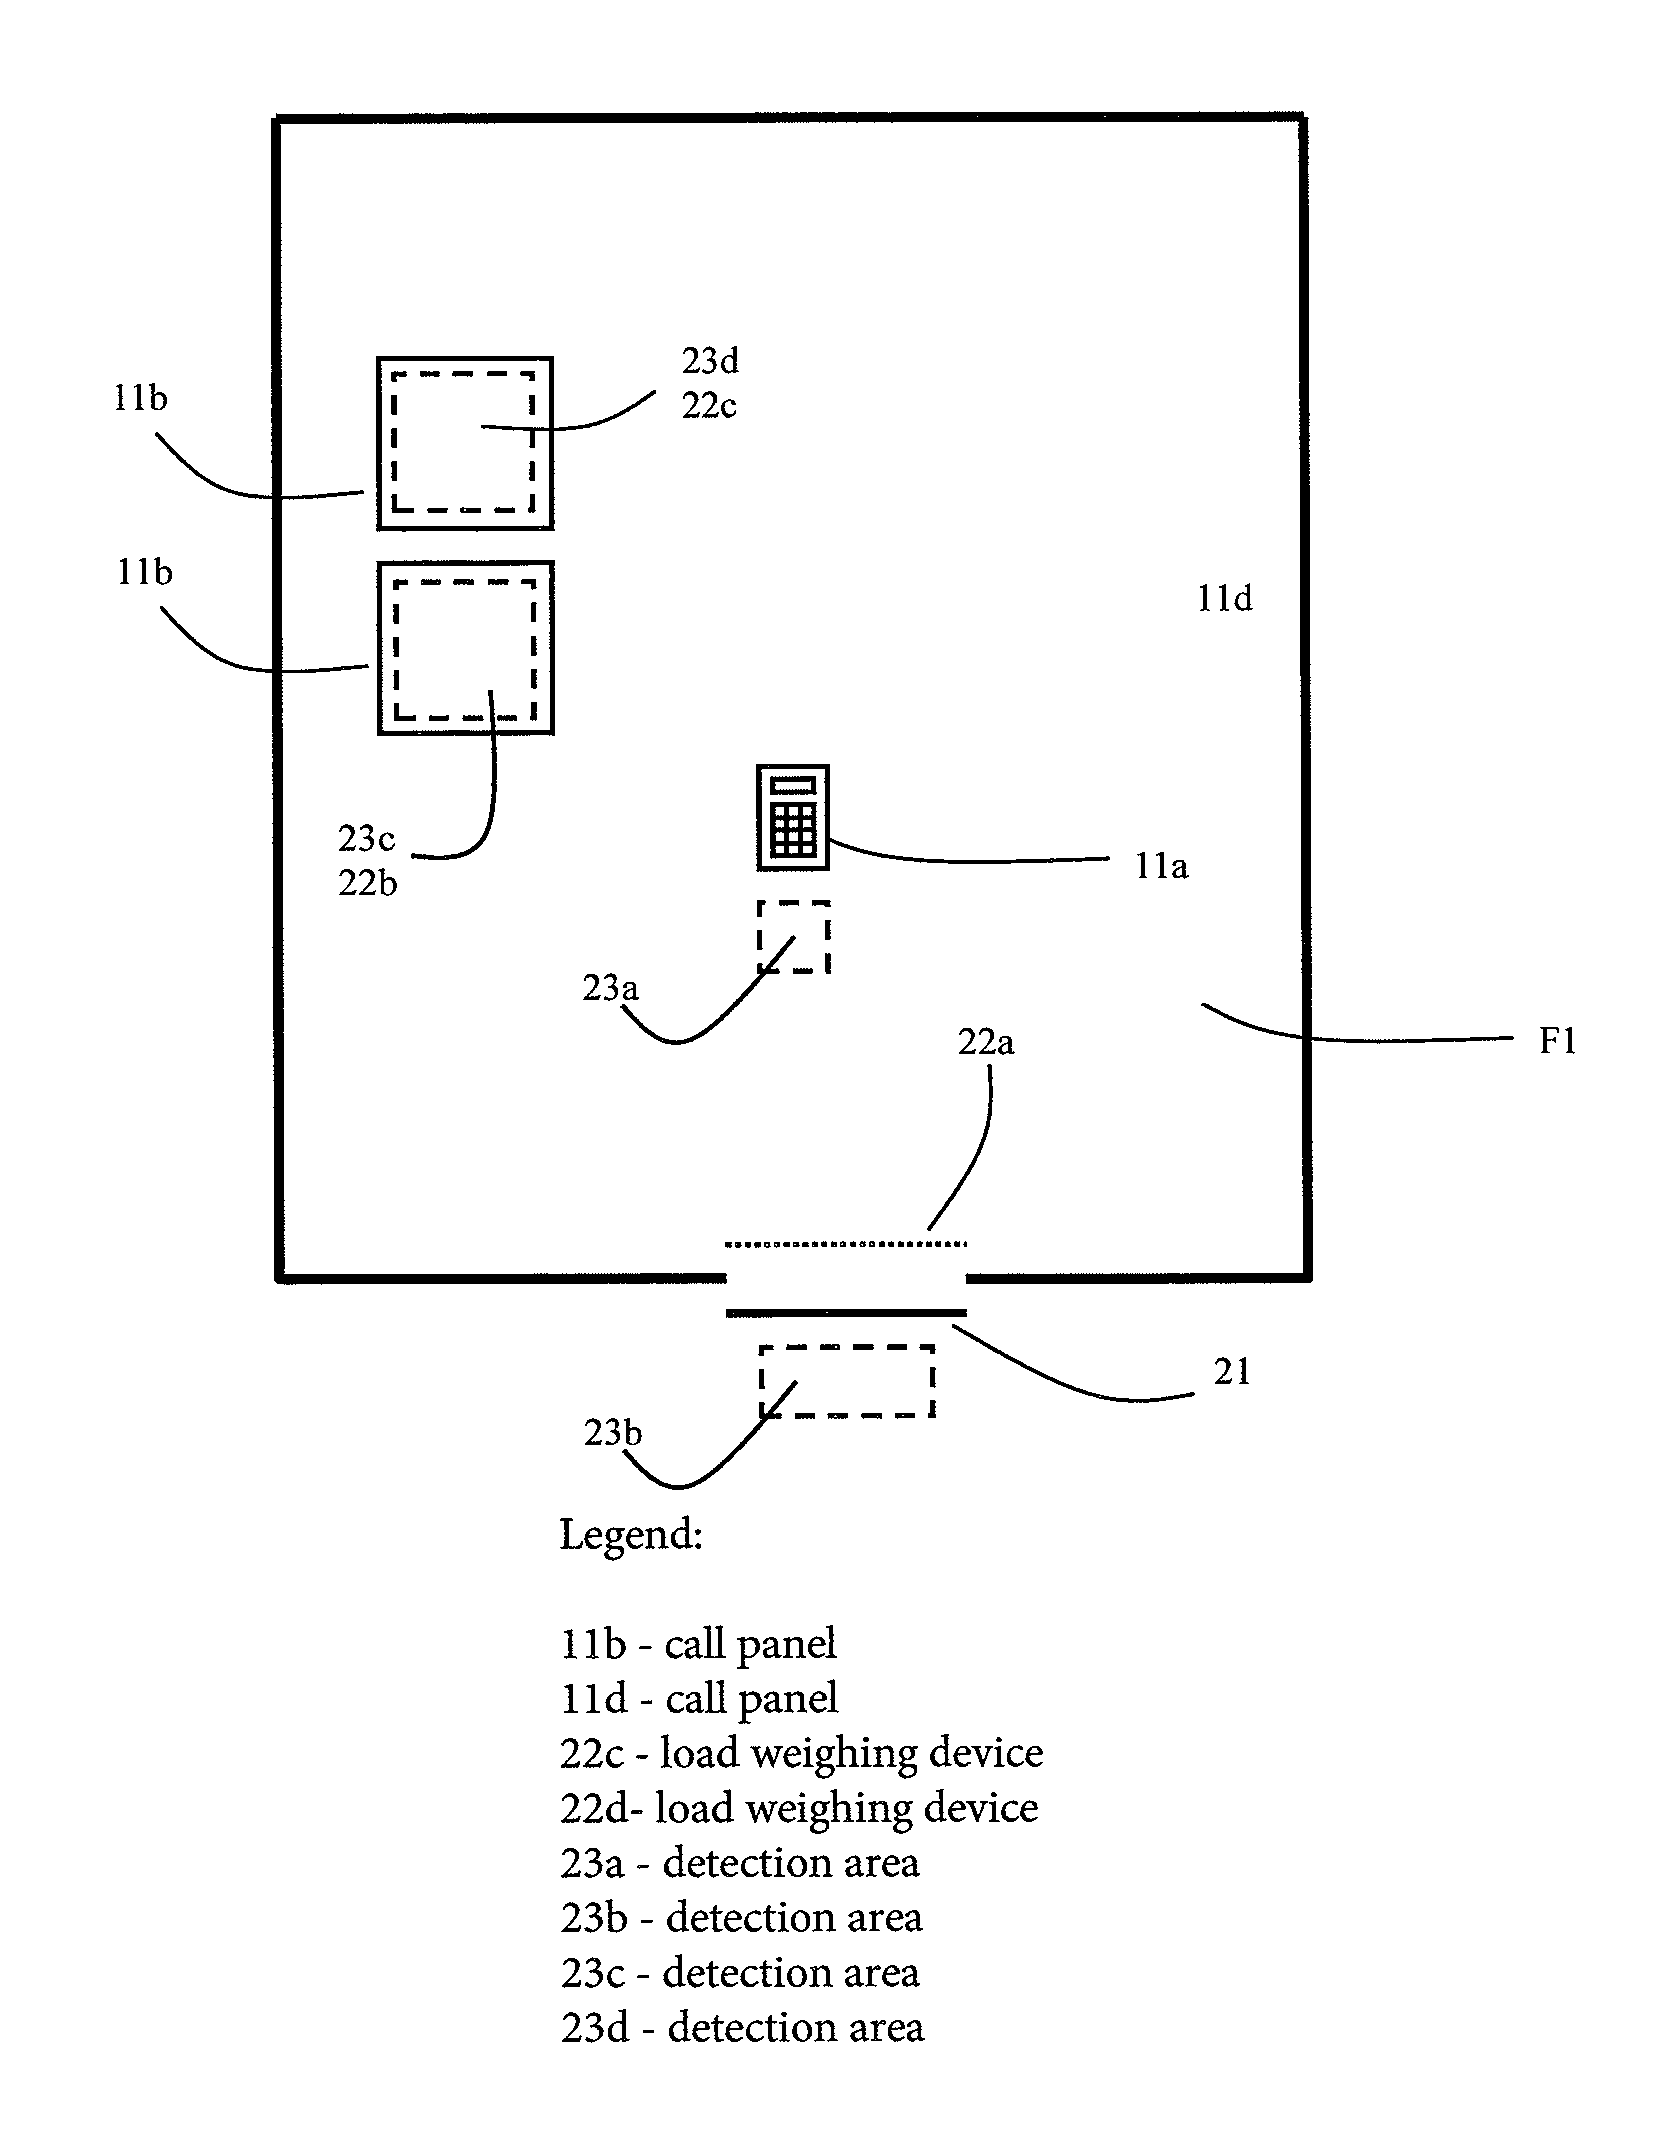 Conveying system having a detection area